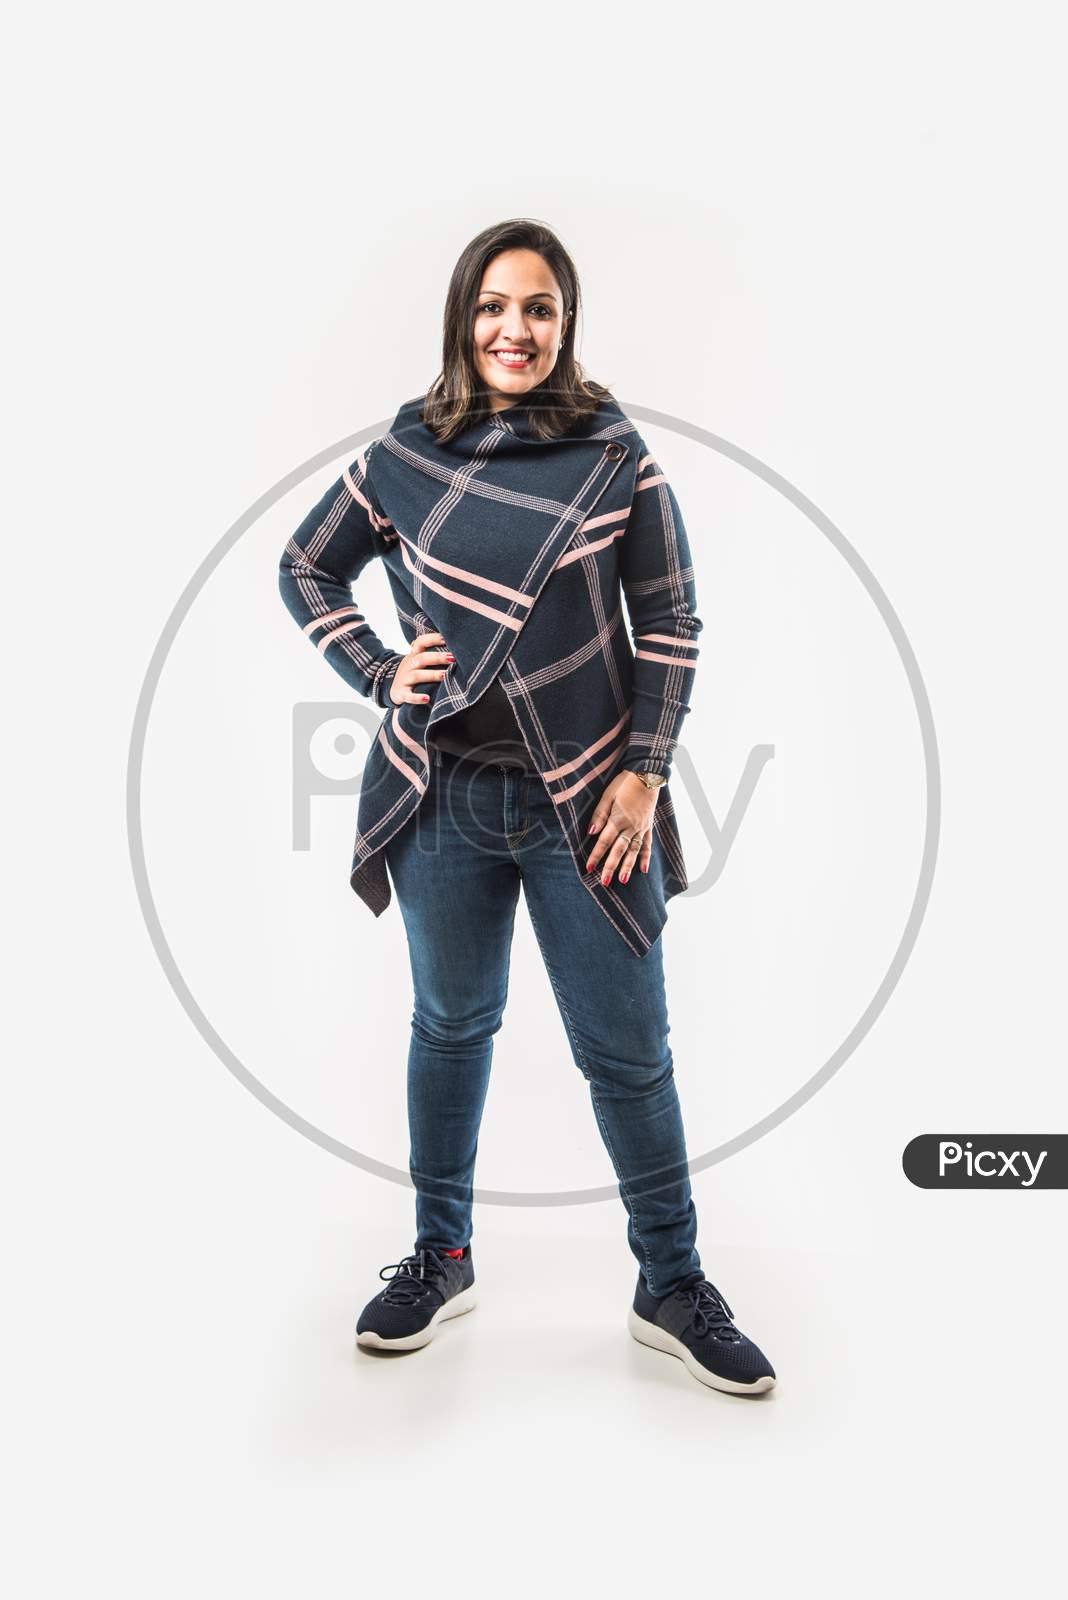 Indian Lady / woman in winter wear presenting or with hands stretched, standing isolated over white background